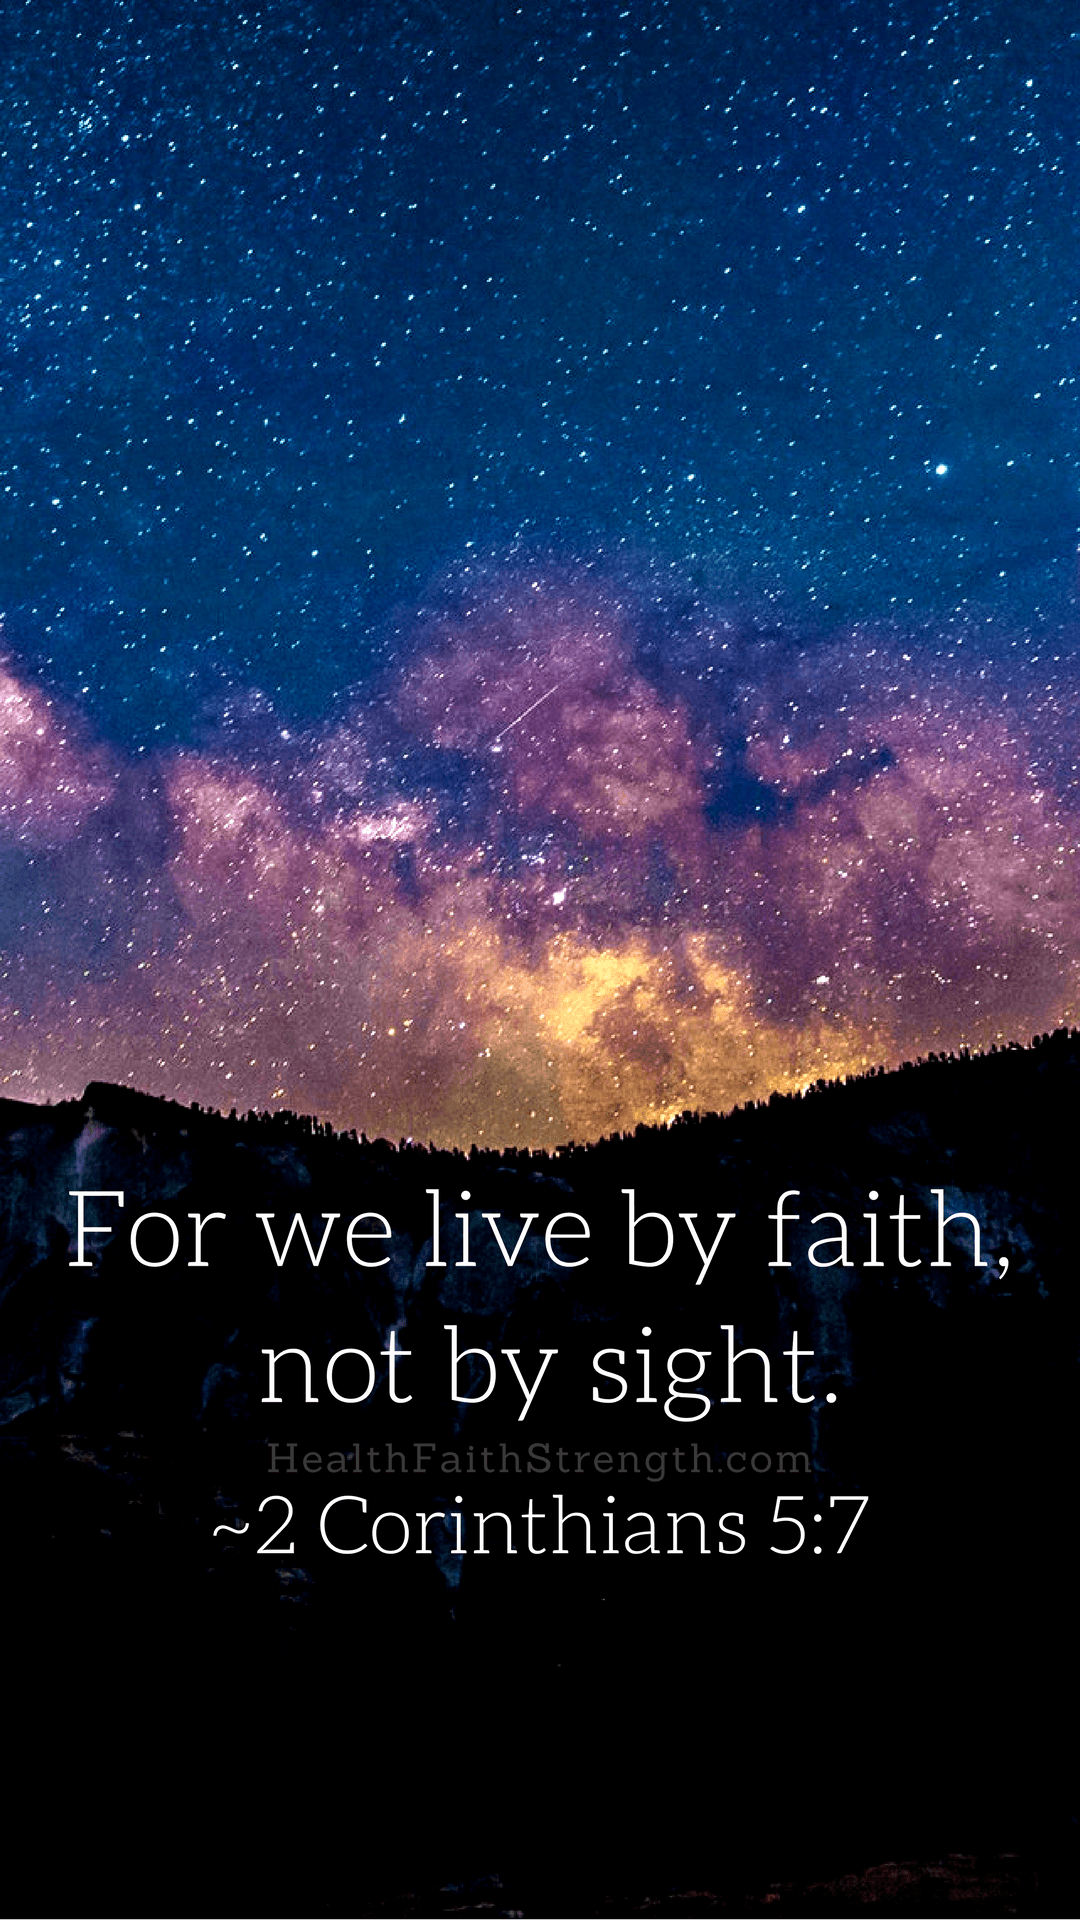 Downloadable Bible Verse Wallpaper for iPhone.Faith.Strength